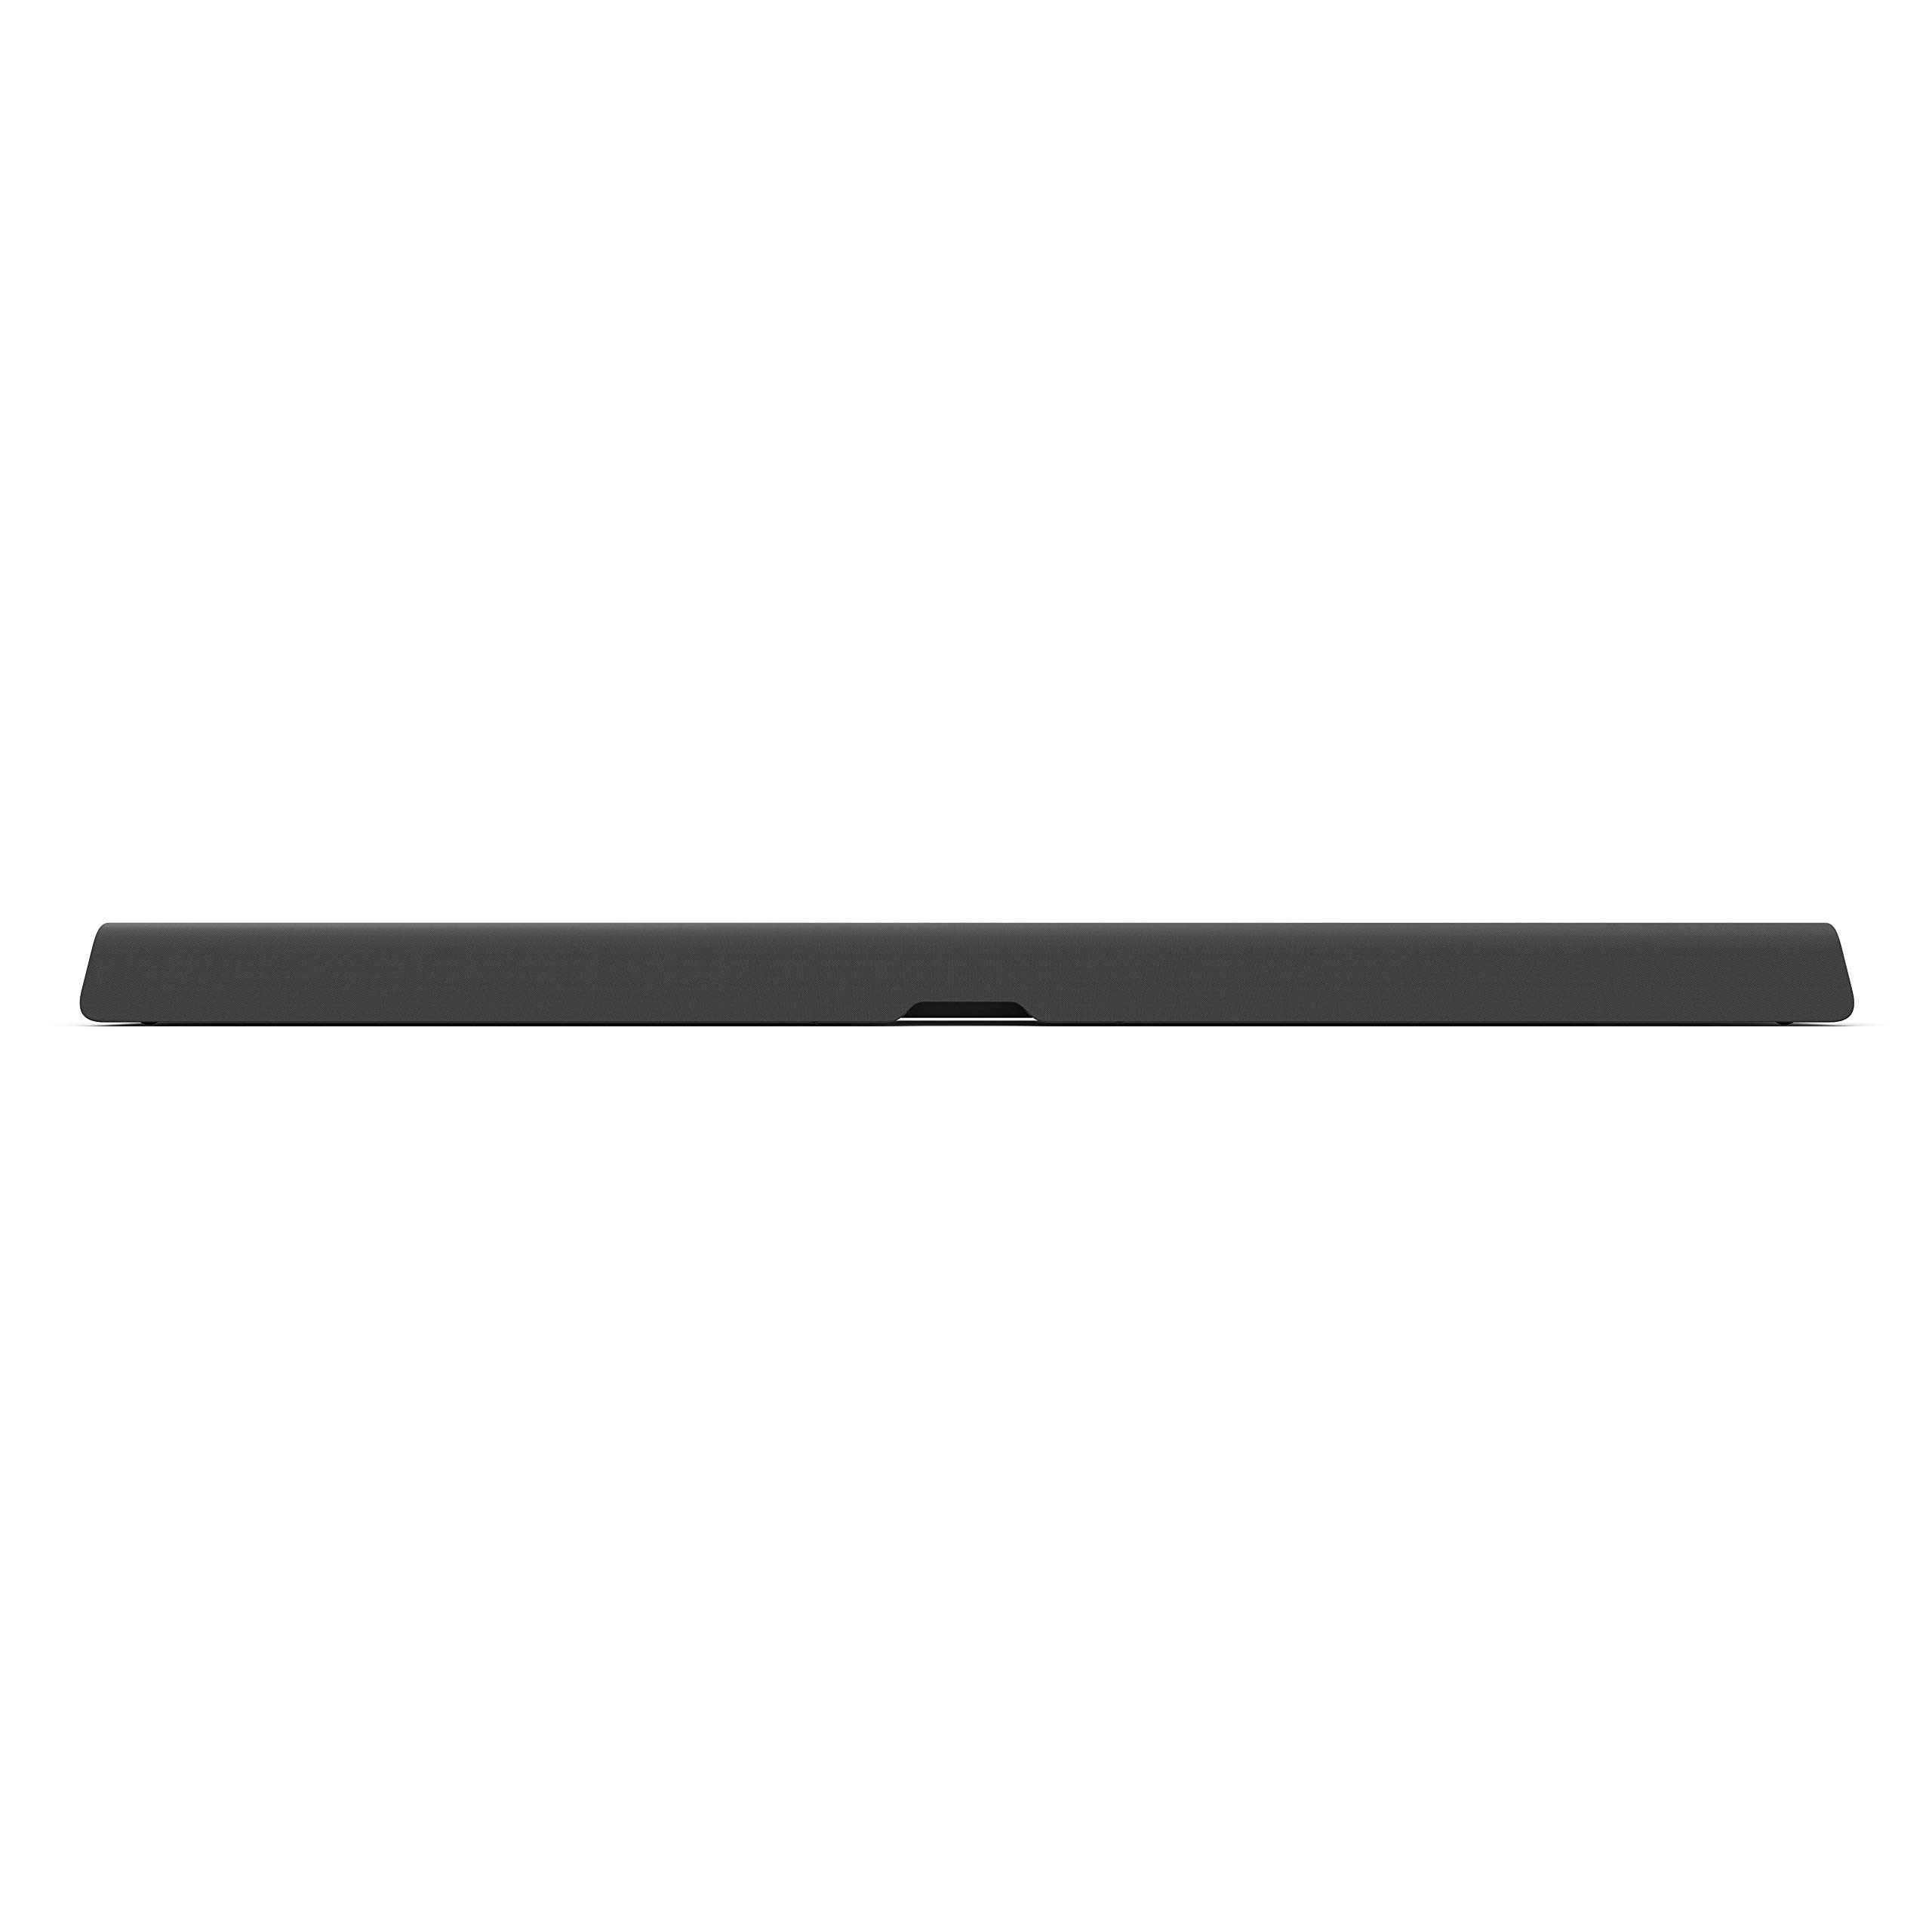 VIZIO M-Series All-in-One 2.1 Home Theater Sound Bar (M21d-H8R) (Renewed)